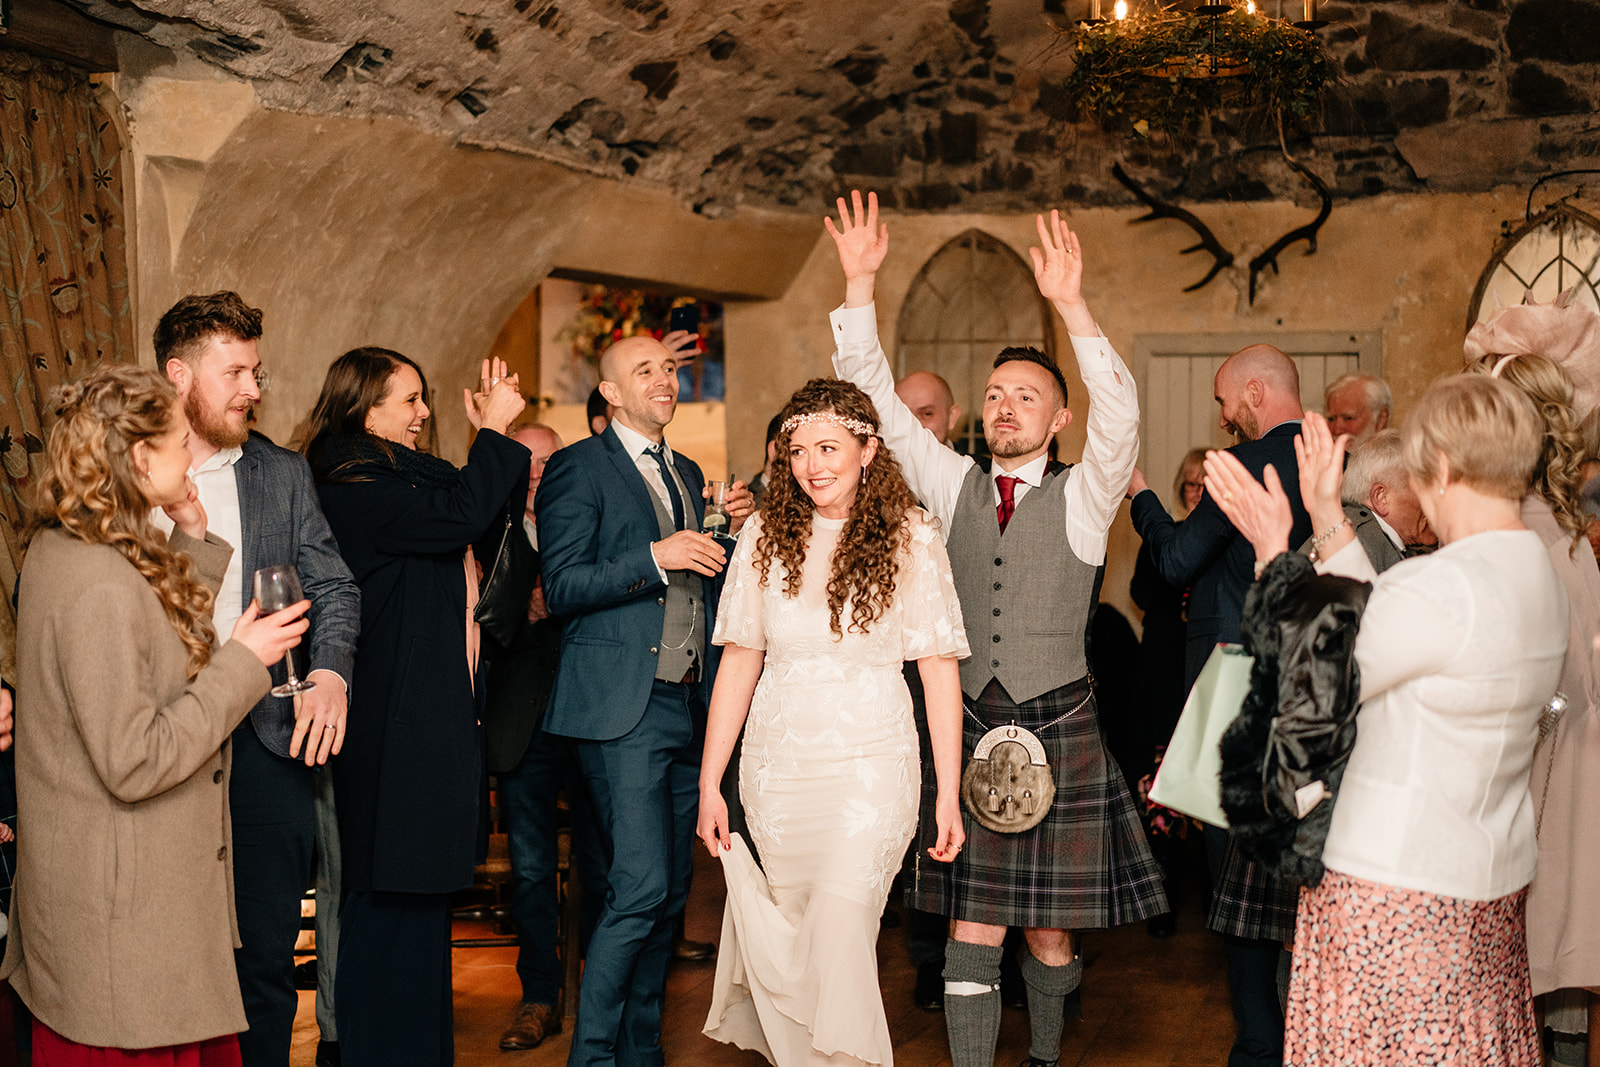 The first dance of a wedding couple at Neidpath castle